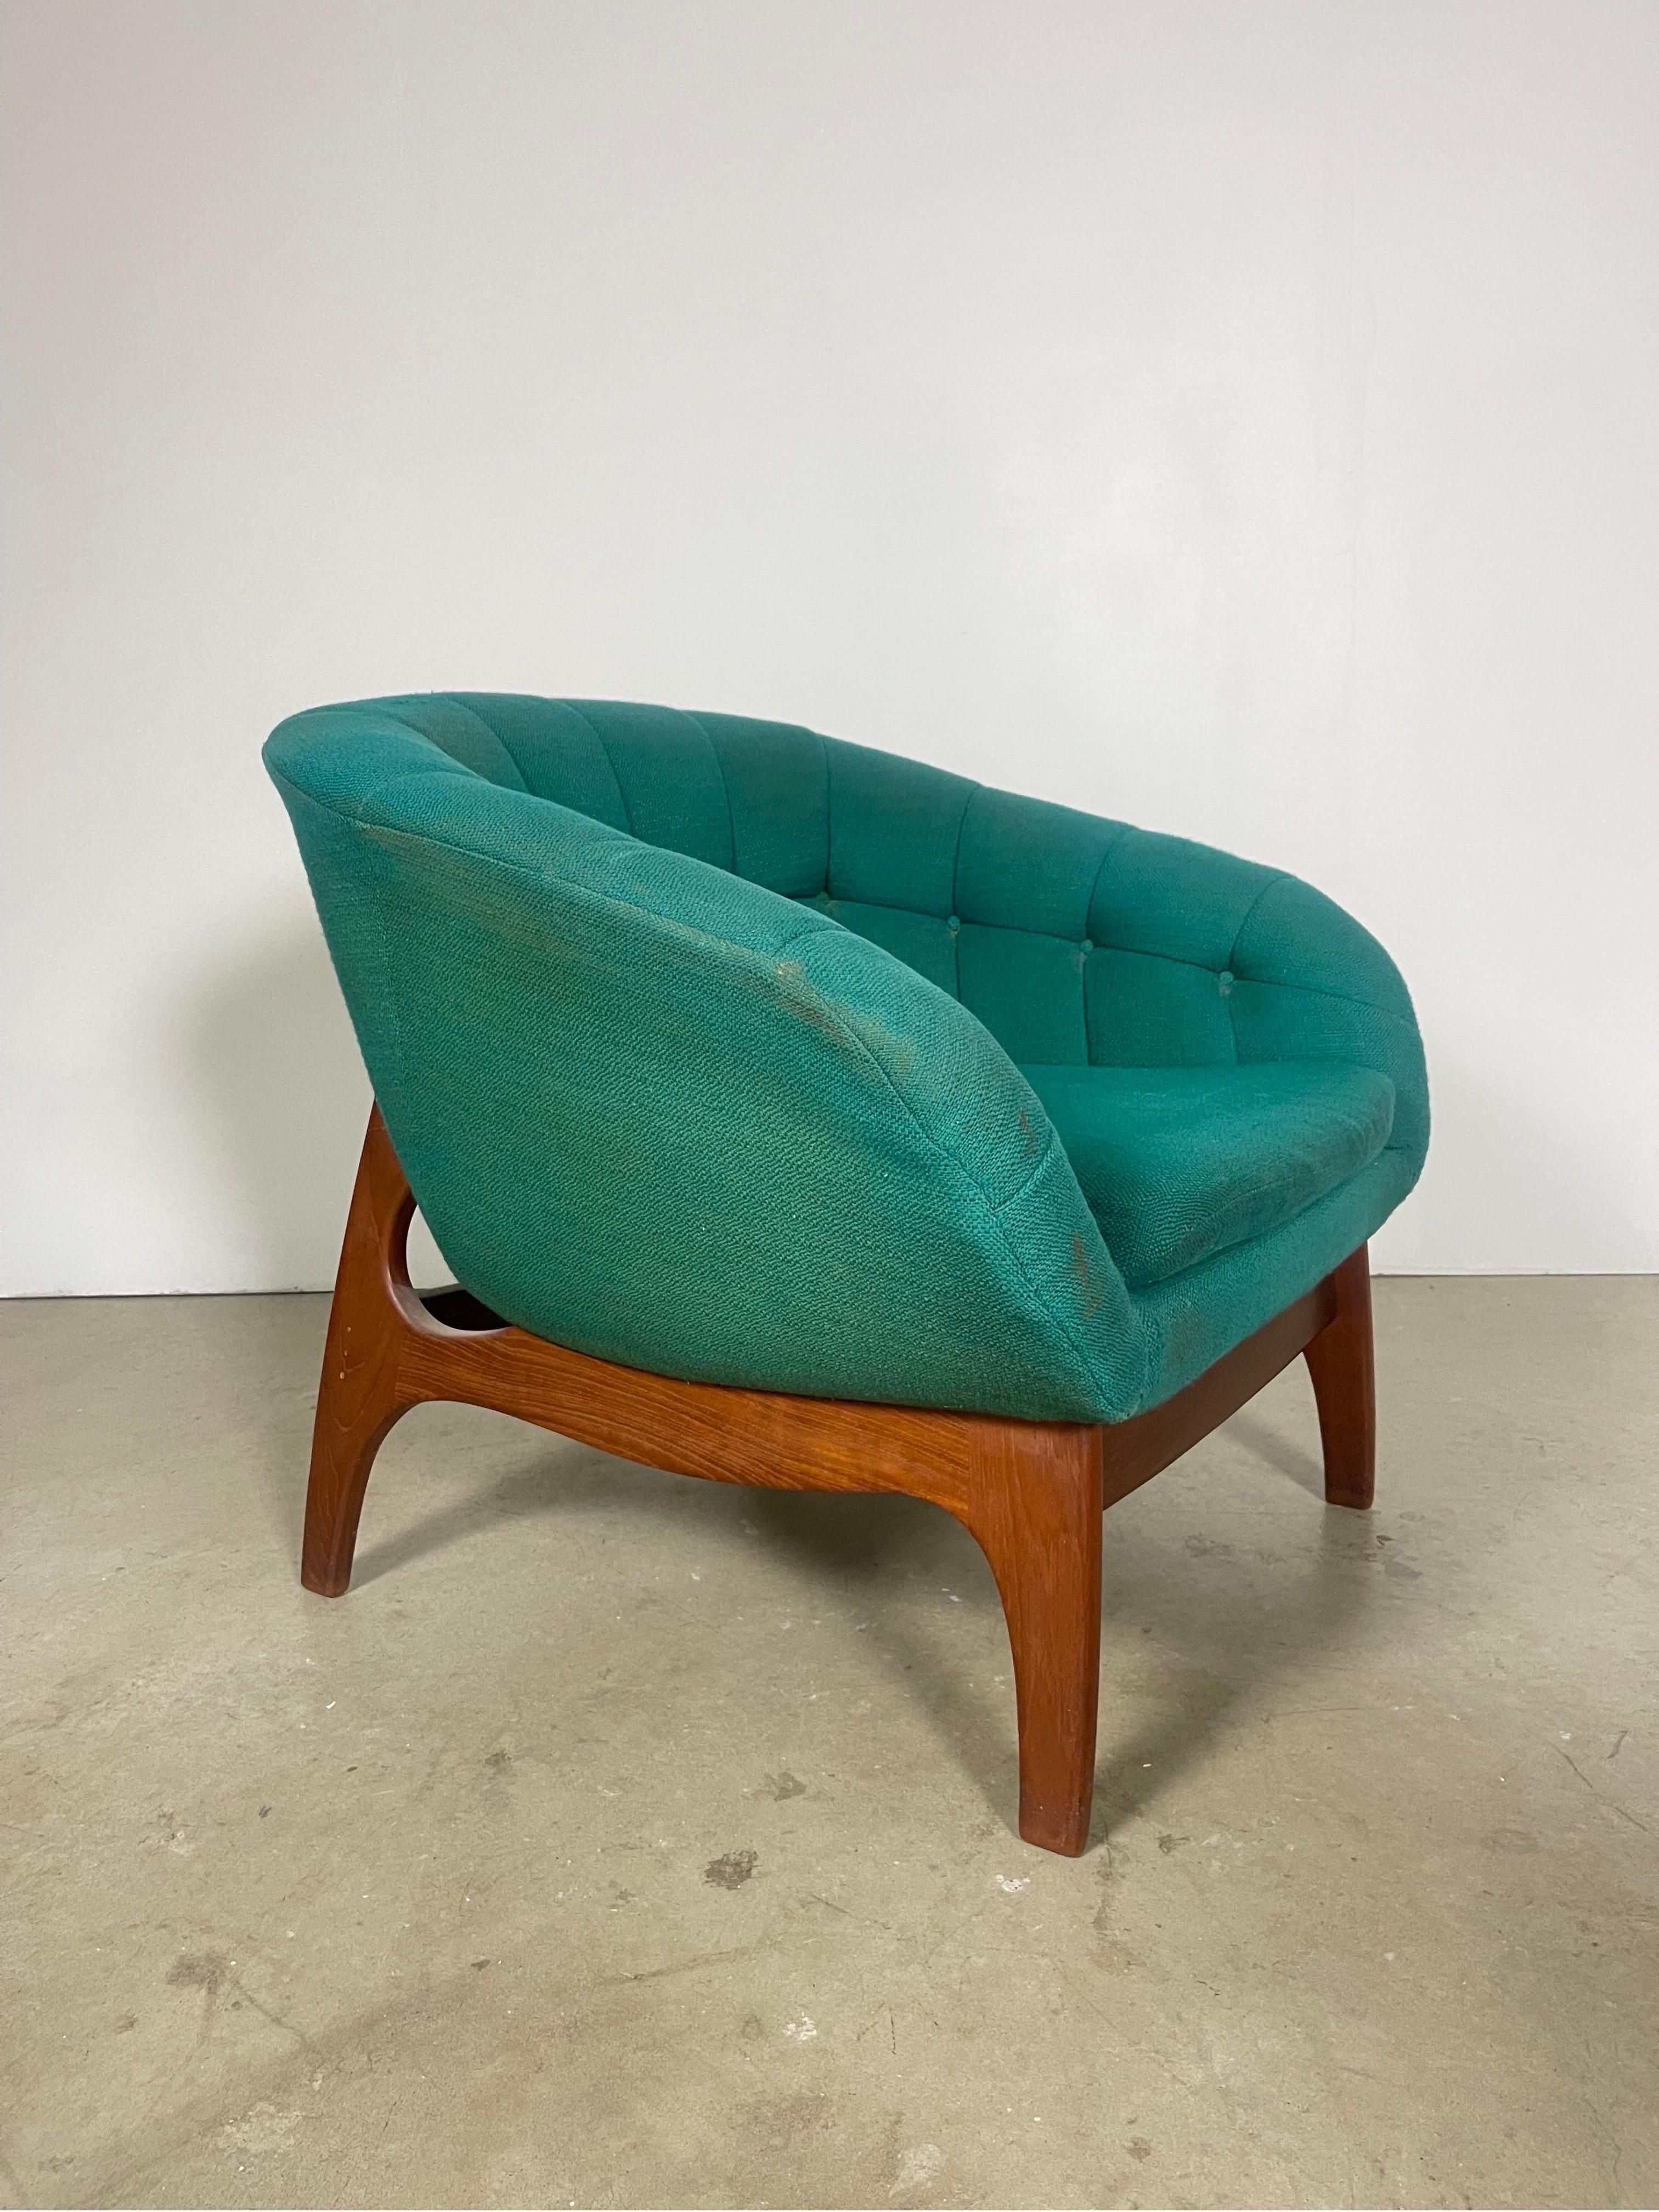 Experience Canadian modernism with this R. Huber chair, perfectly preserved in its original mid-century condition. 

This piece retains the original tags. In unaltered condition- recommended that upholstery is replaced. Teak frame is solid with no